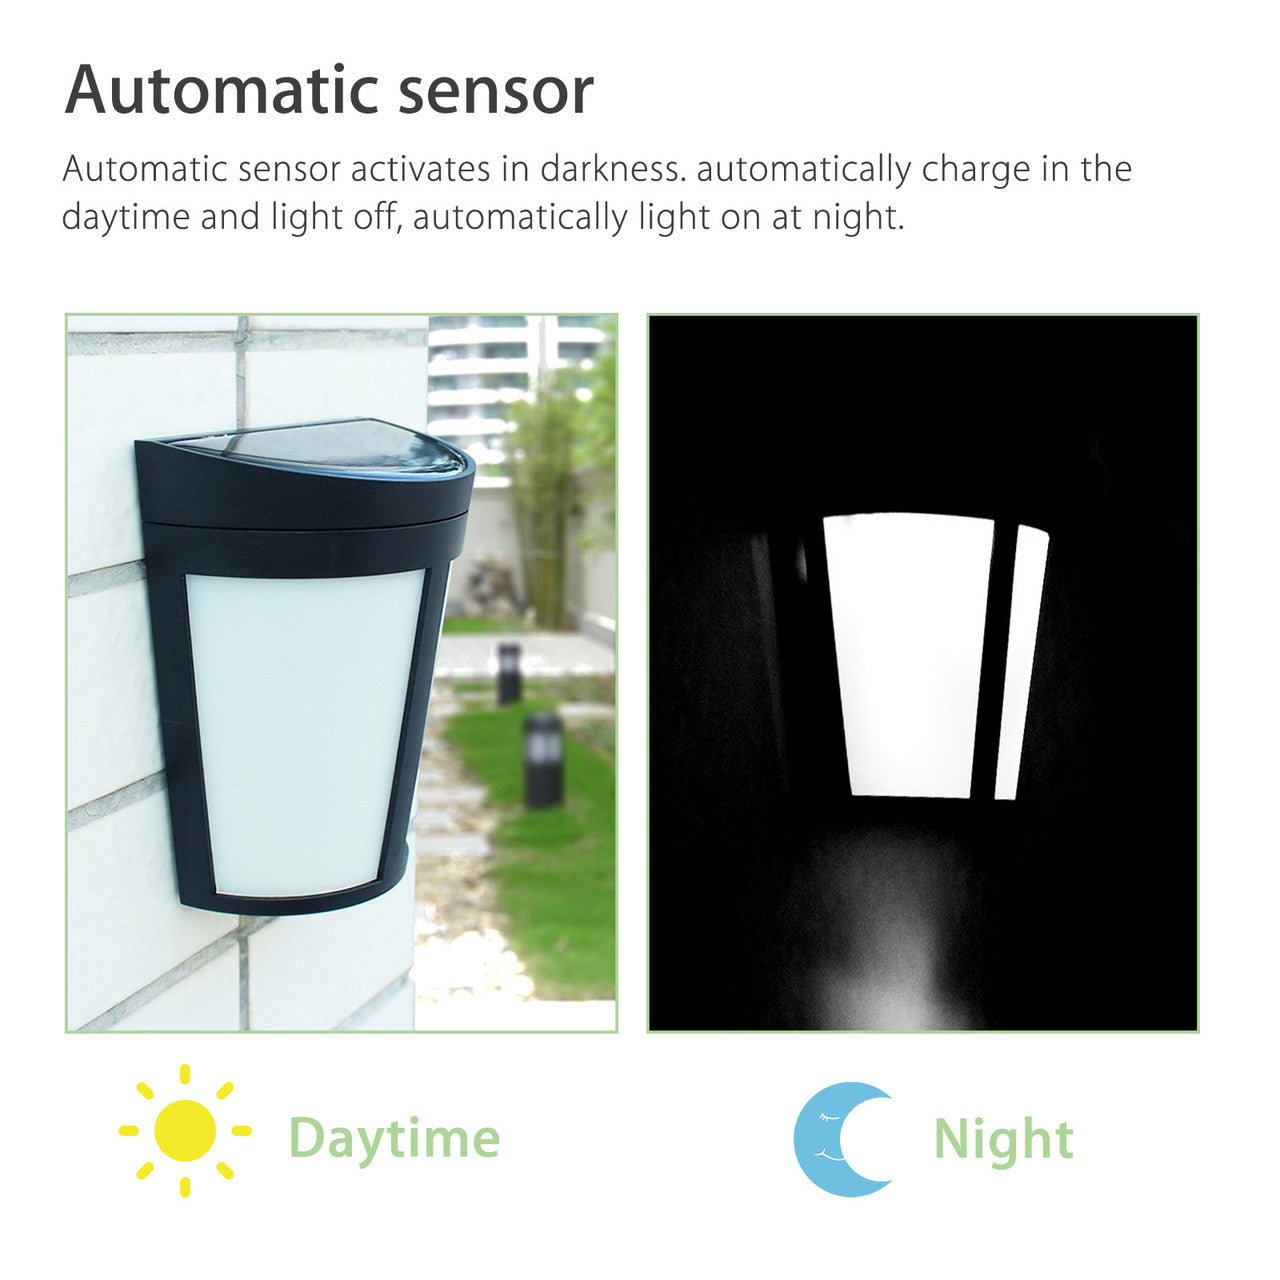 Wall Mounted Solar Lights, Solar Night Security Lamps for Front Door, Outside Wall, Back Yard, Garage, Garden, Fence, Driveway